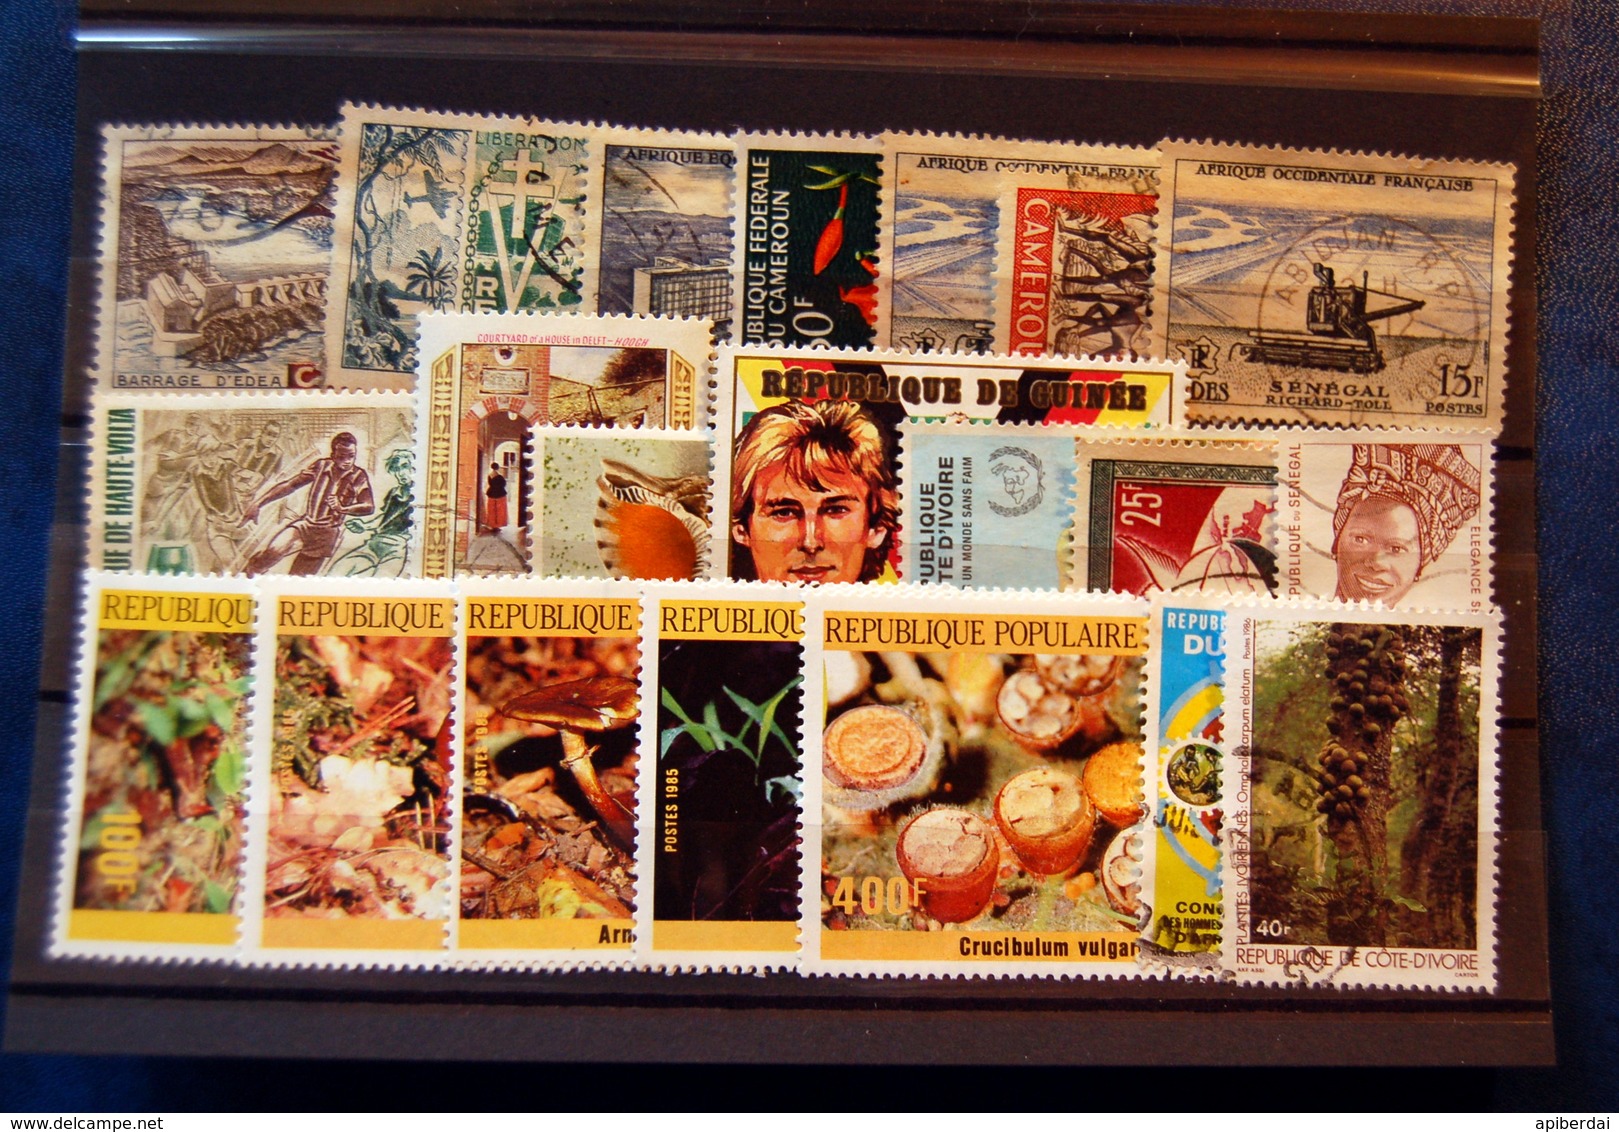 Afrique Africa - Small Batch Of 22 Stamps Used - Lots & Kiloware (mixtures) - Max. 999 Stamps